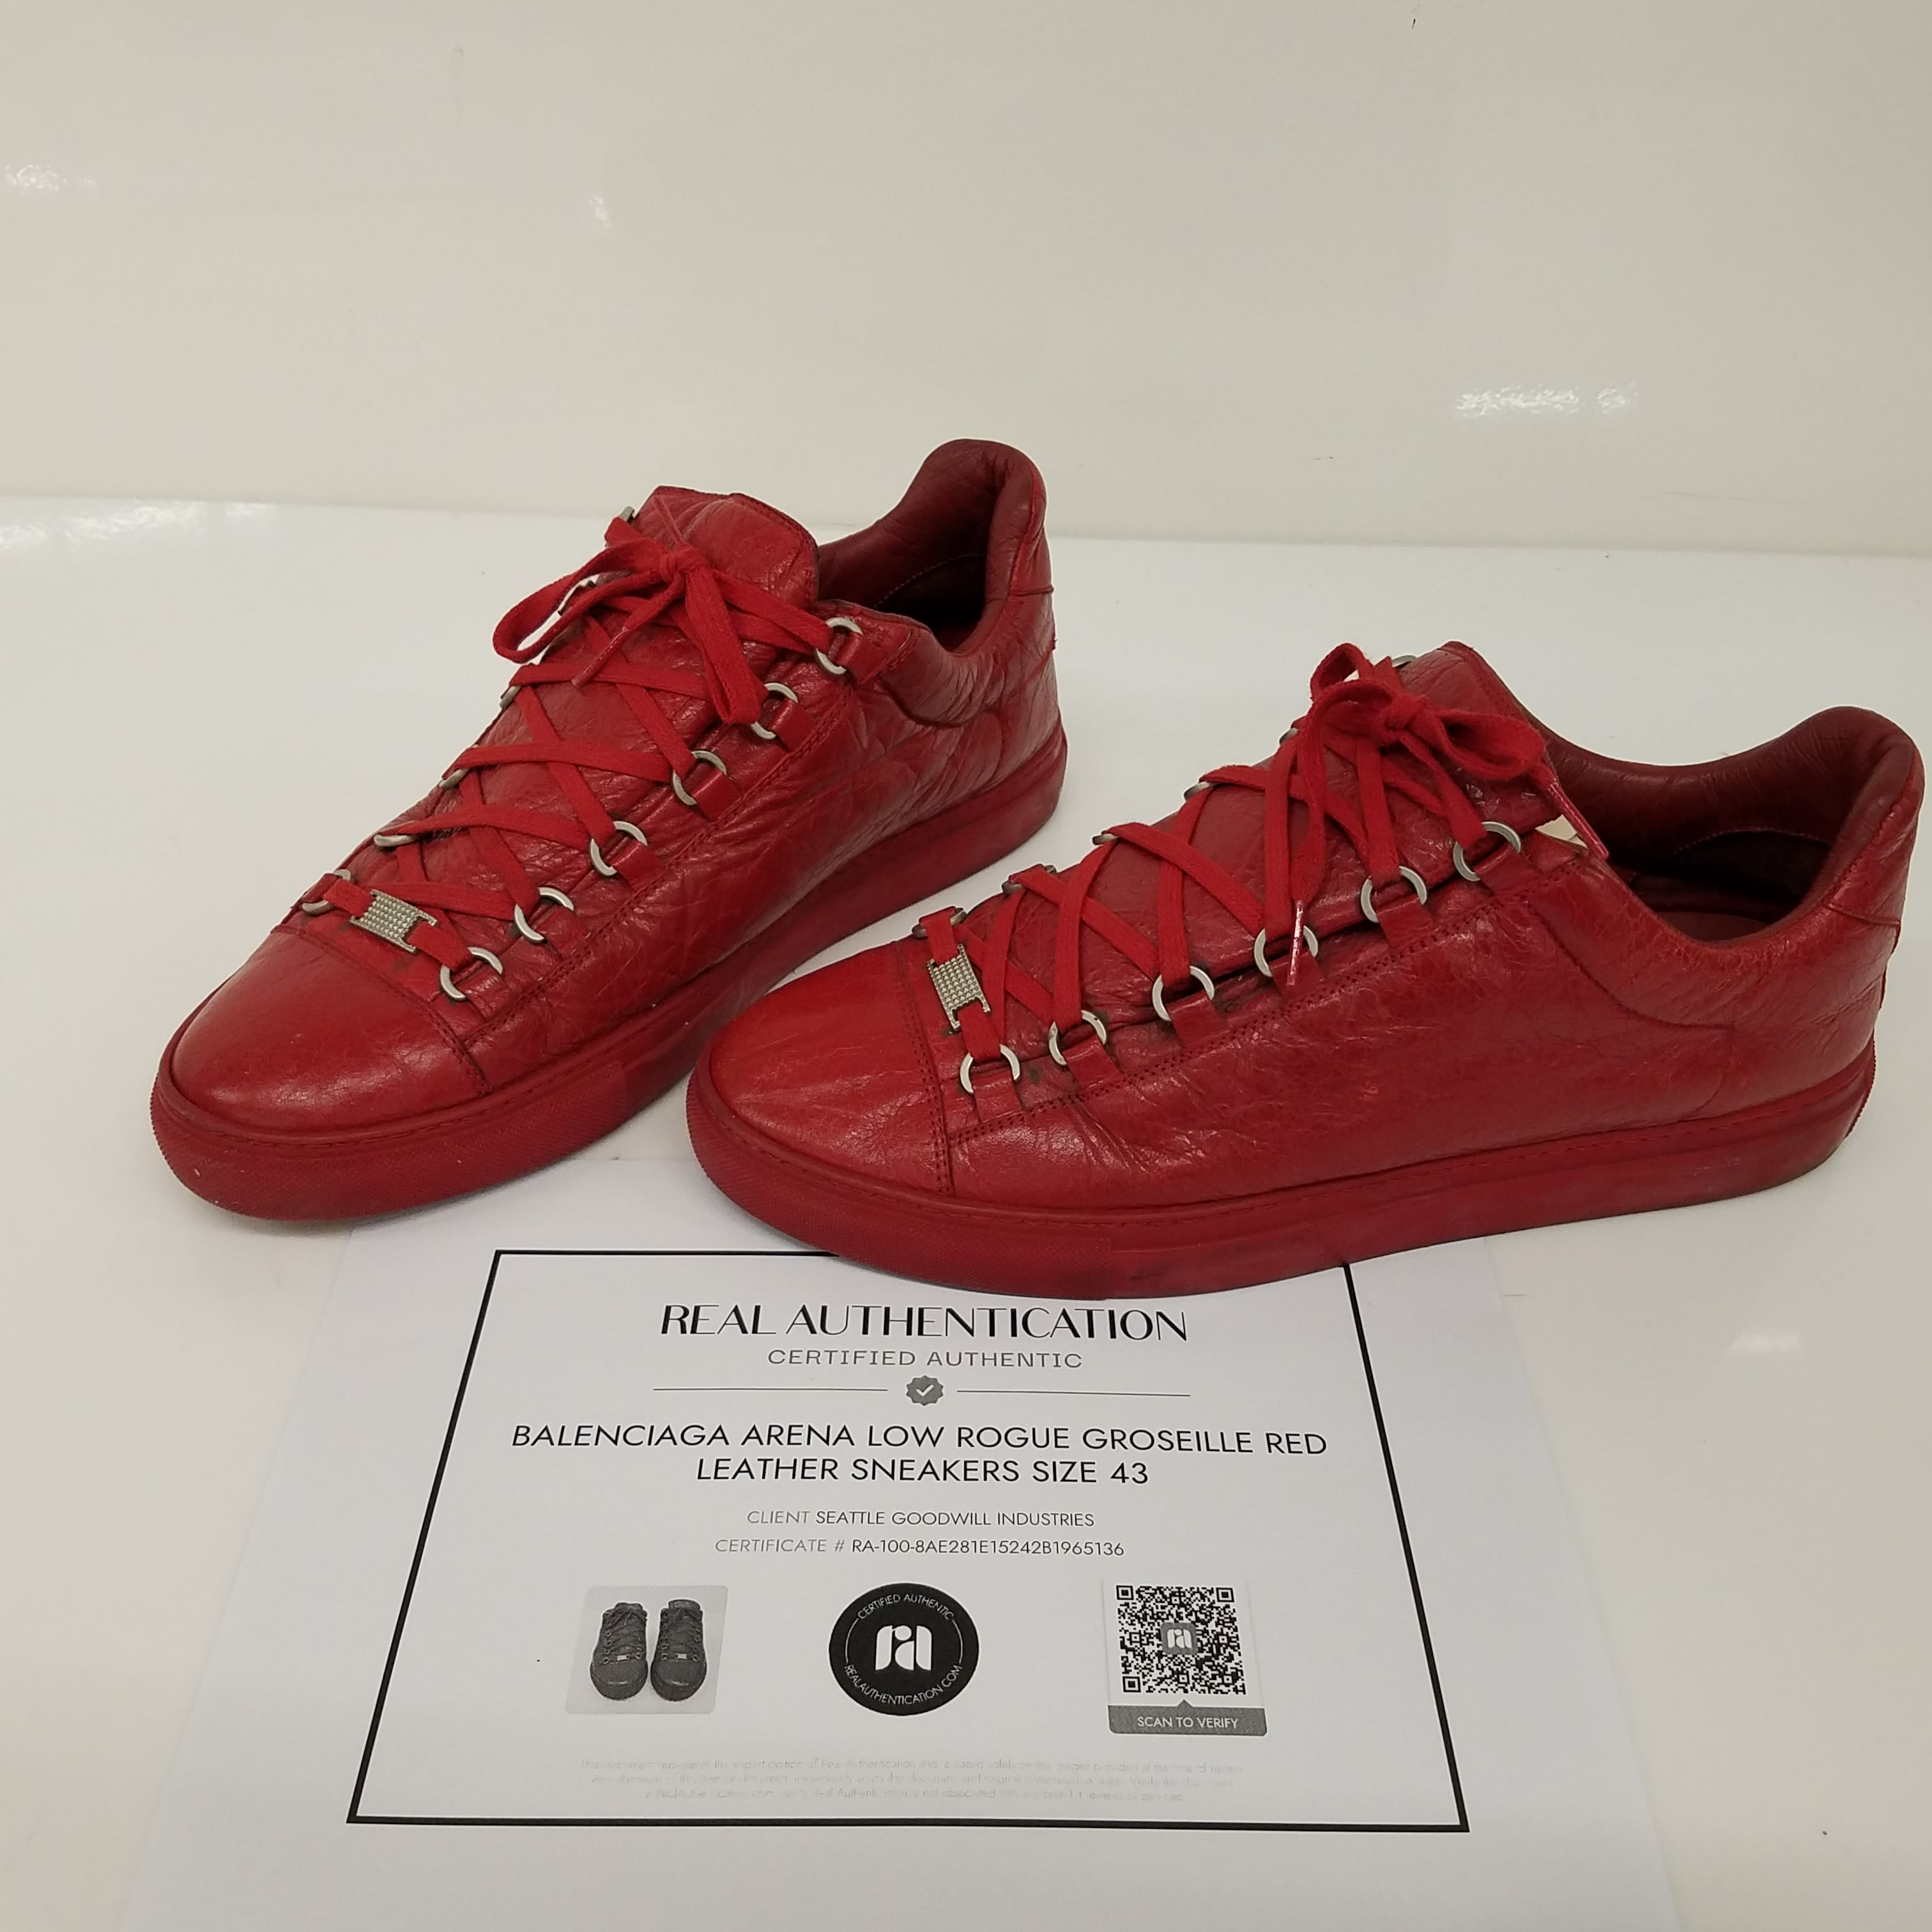 gammel Muligt announcer Buy the Balenciaga Arena Low Rouge Groseille Red Leather Sneakers Men's  Size 9 | GoodwillFinds